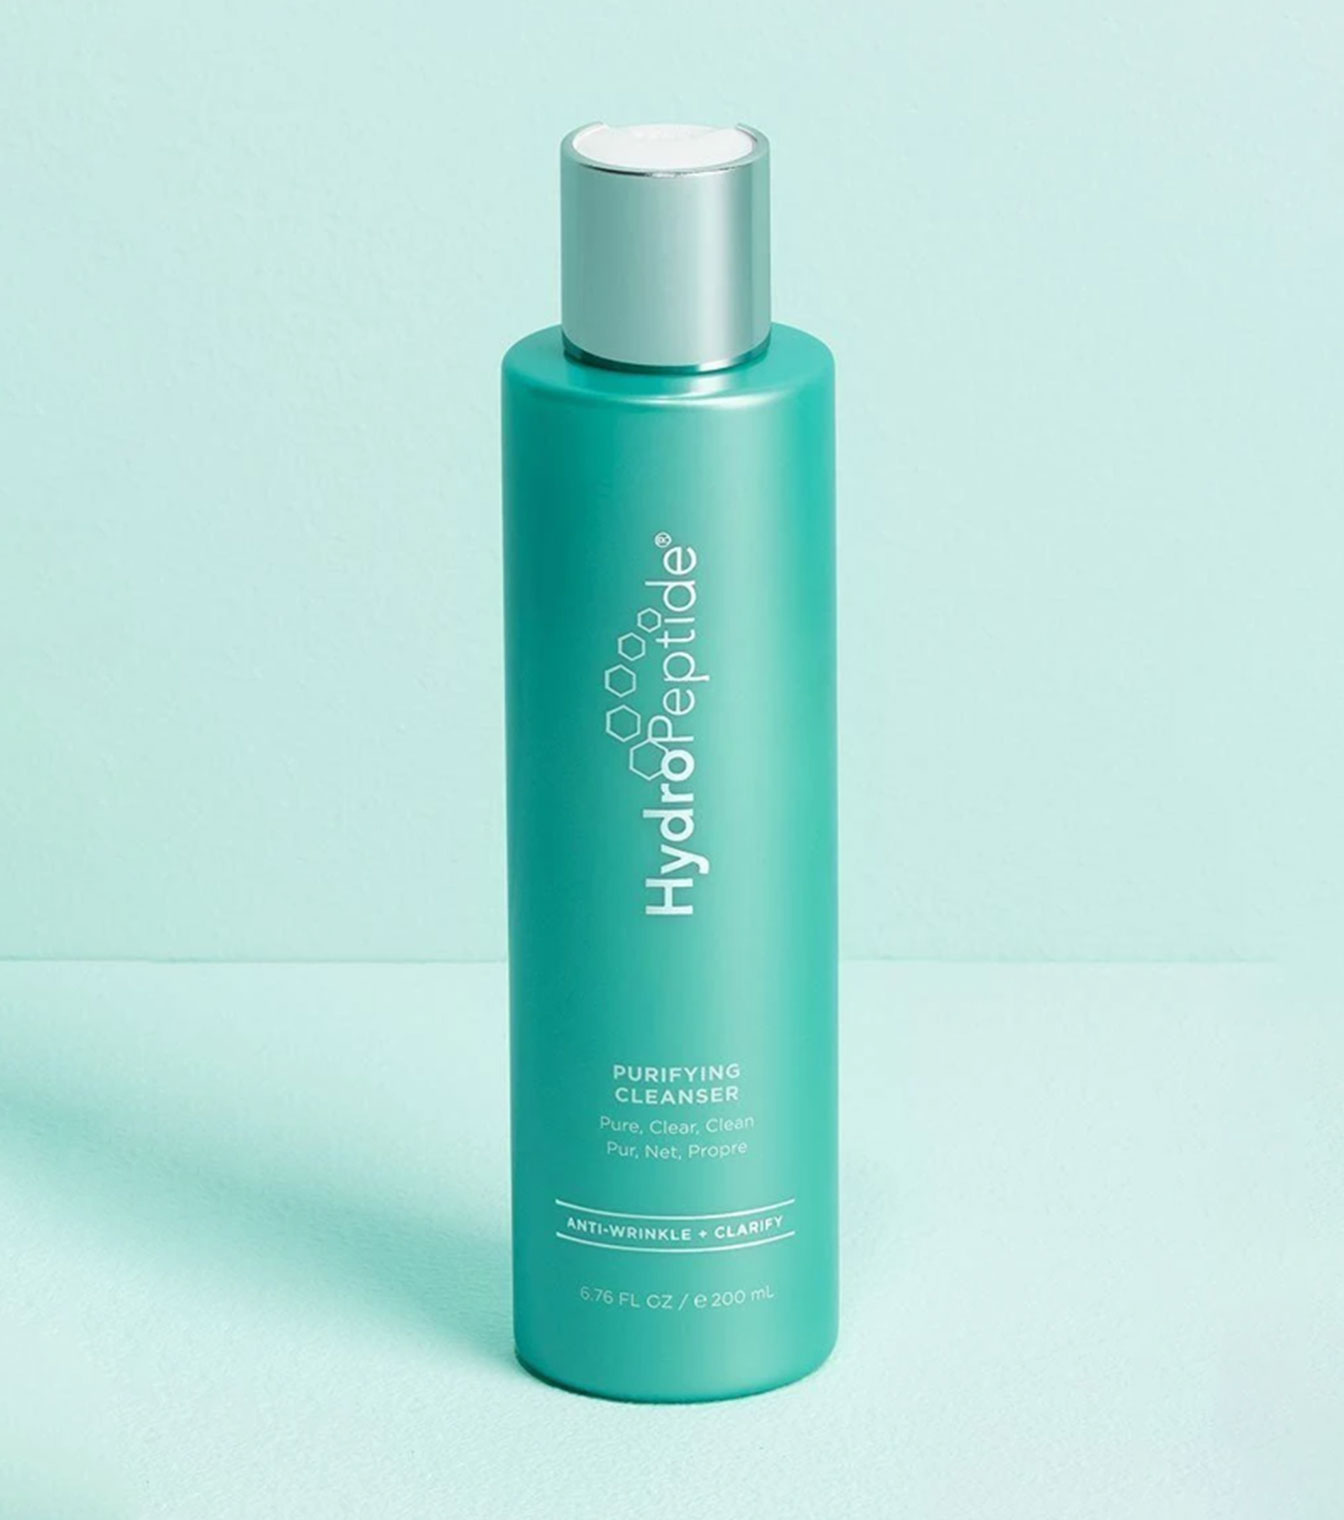 Purifying cleansing gel. Purifying Cleanser HYDROPEPTIDE. HYDROPEPTIDE Cleansing Gel. Клинсер гель ГИДРОПЕПТИД. Exfoliating Cleanser HYDROPEPTIDE.